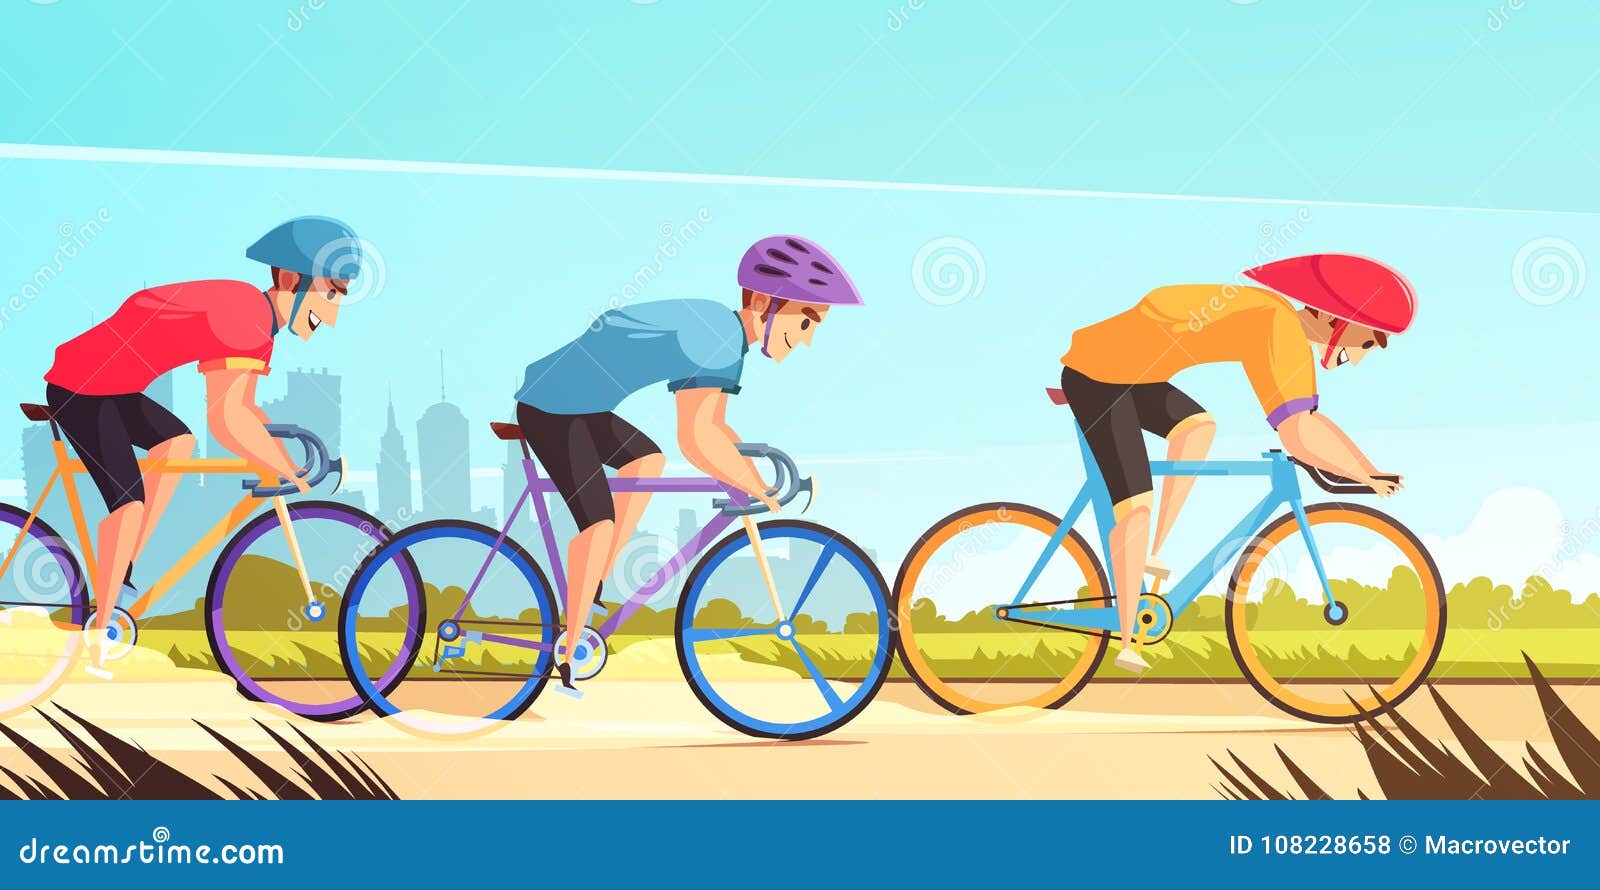 Cycle Competitive Racing Cartoon Illustration Stock Vector - Illustration  of recreation, club: 108228658